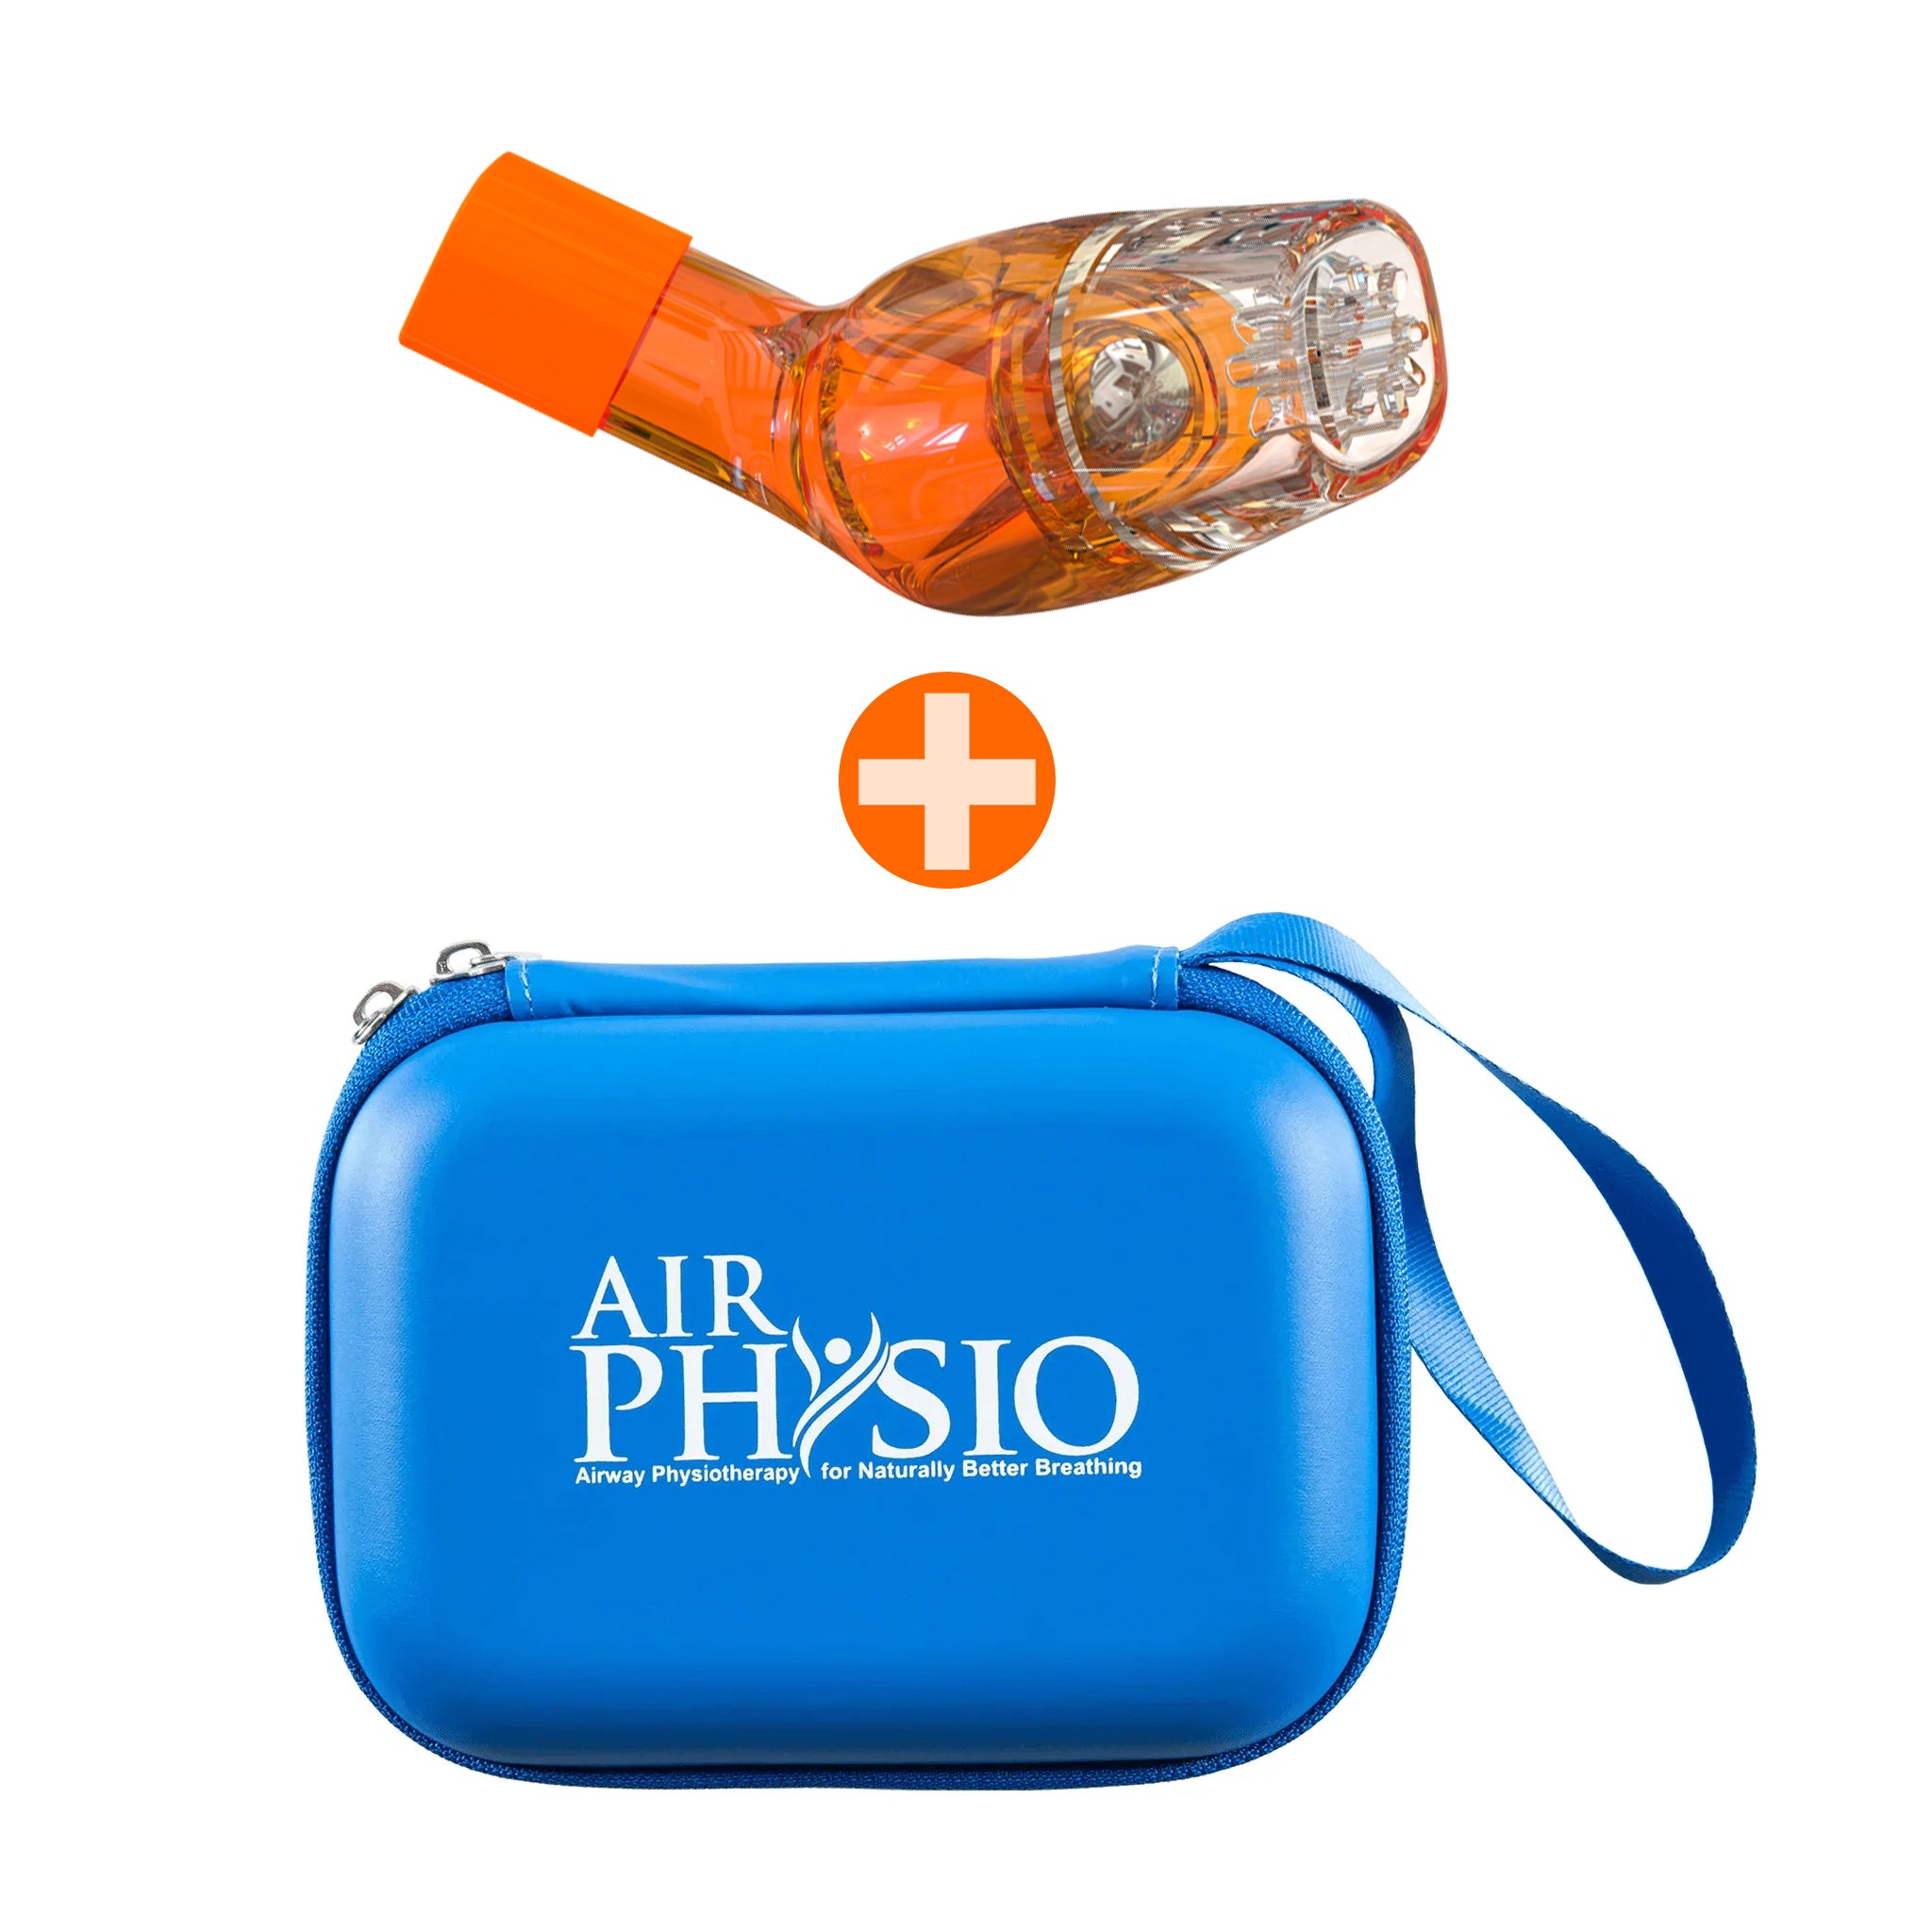 Airphysio Mucous Clearance Device